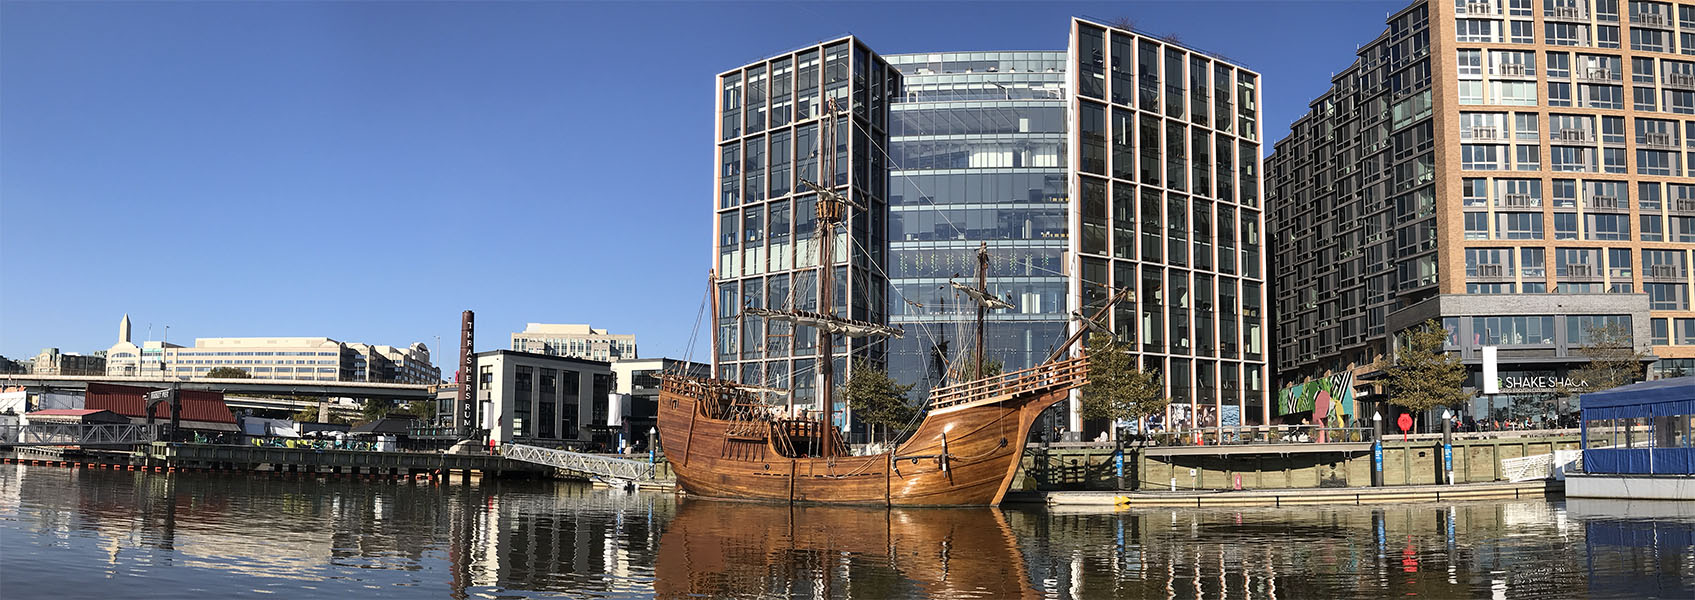 Photo of Replica Santa Maria Sailing Ship Visiting the Washington DC Waterfront with Modern Buildings in Background.